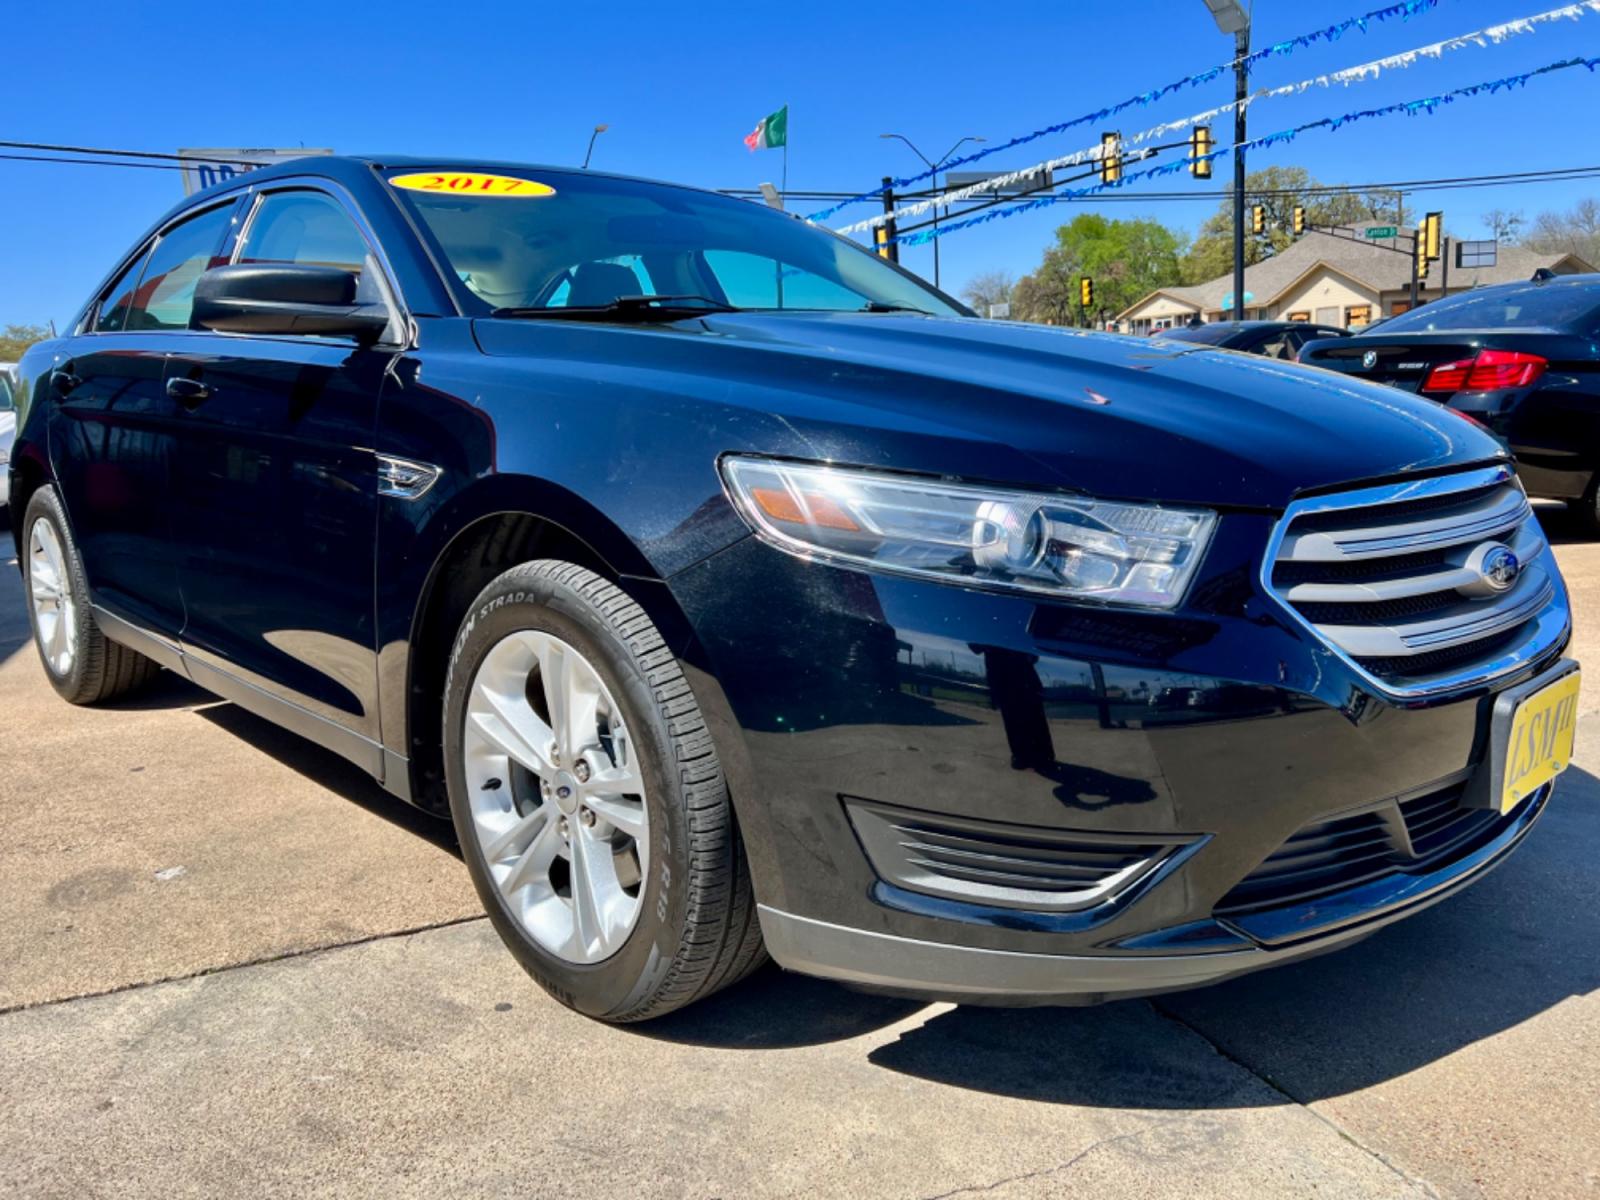 2017 BLACK FORD TAURUS (1FAHP2D81HG) , located at 5900 E. Lancaster Ave., Fort Worth, TX, 76112, (817) 457-5456, 0.000000, 0.000000 - This is a 2017 FORD TAURUS 4 DOOR SEDAN that is in excellent condition. There are no dents or scratches. The interior is clean with no rips or tears or stains. All power windows, door locks and seats. Ice cold AC for those hot Texas summer days. It is equipped with a CD player, AM/FM radio, AUX port - Photo #8